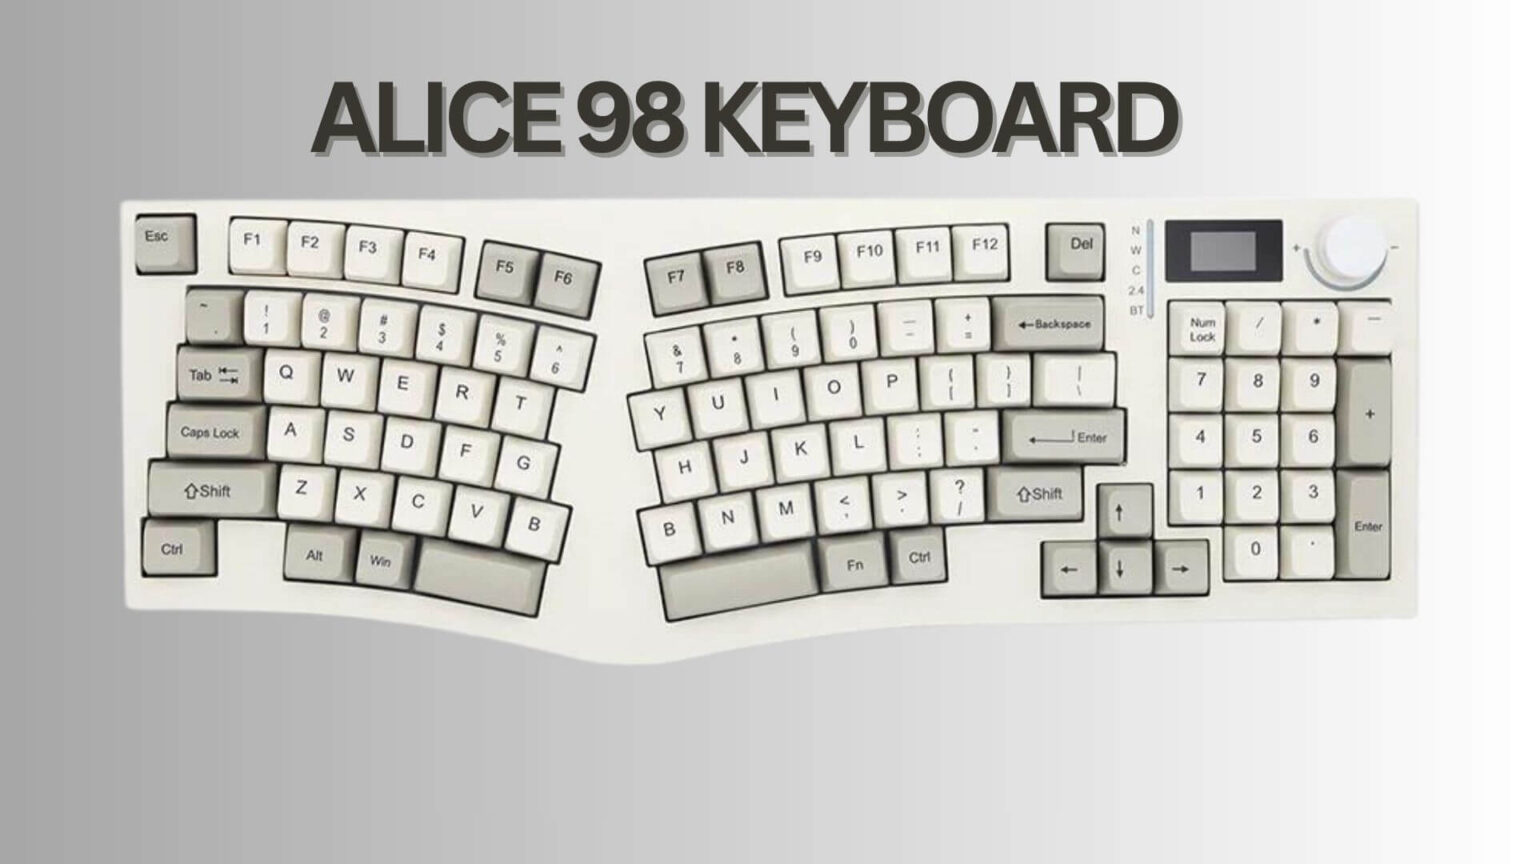 Alice 98 Keyboard Review: Why It's the Best Choice?